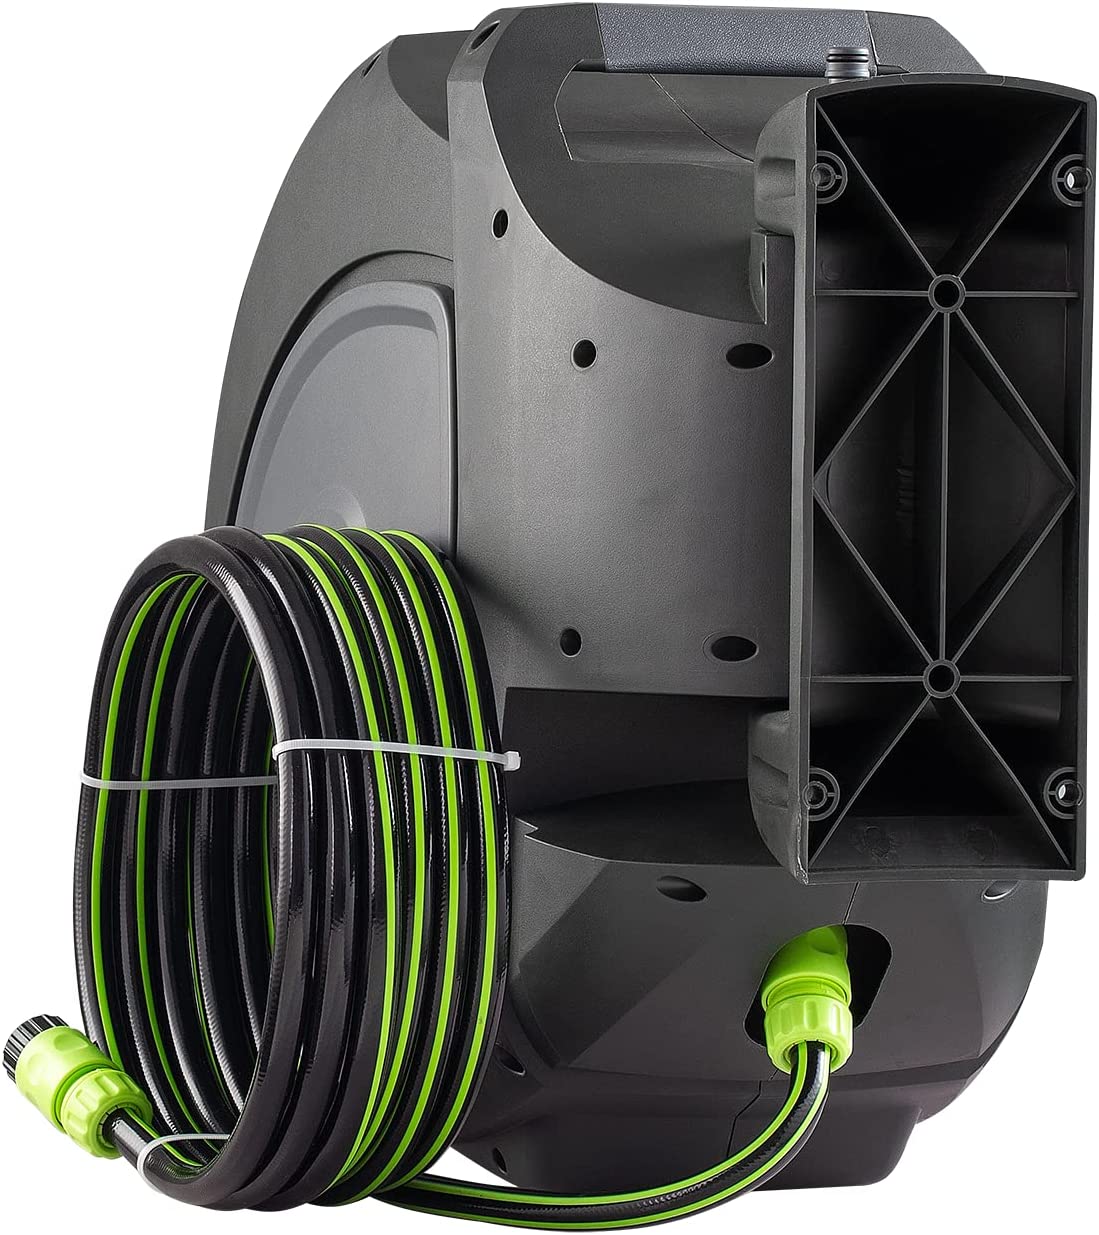 Earthwise 130' Automatic Hose Reel with 7-Setting Metal Hose Nozzle